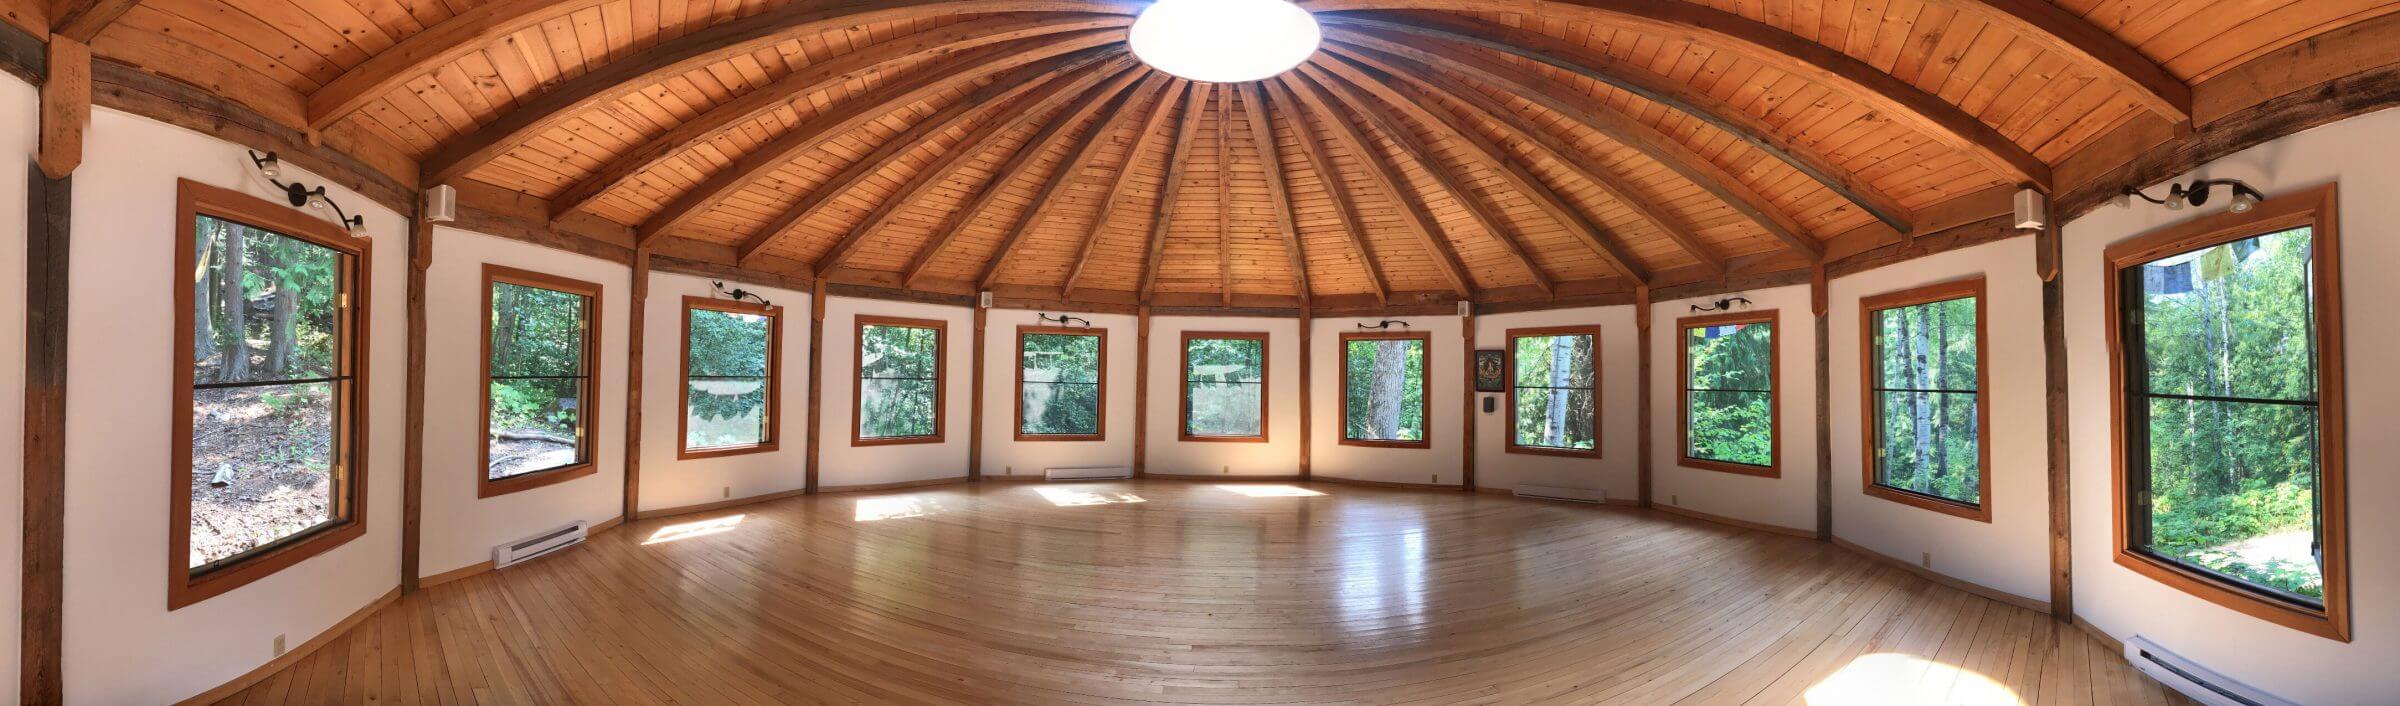 Inside the Maloka, our Yoga dome surrounded by Nature